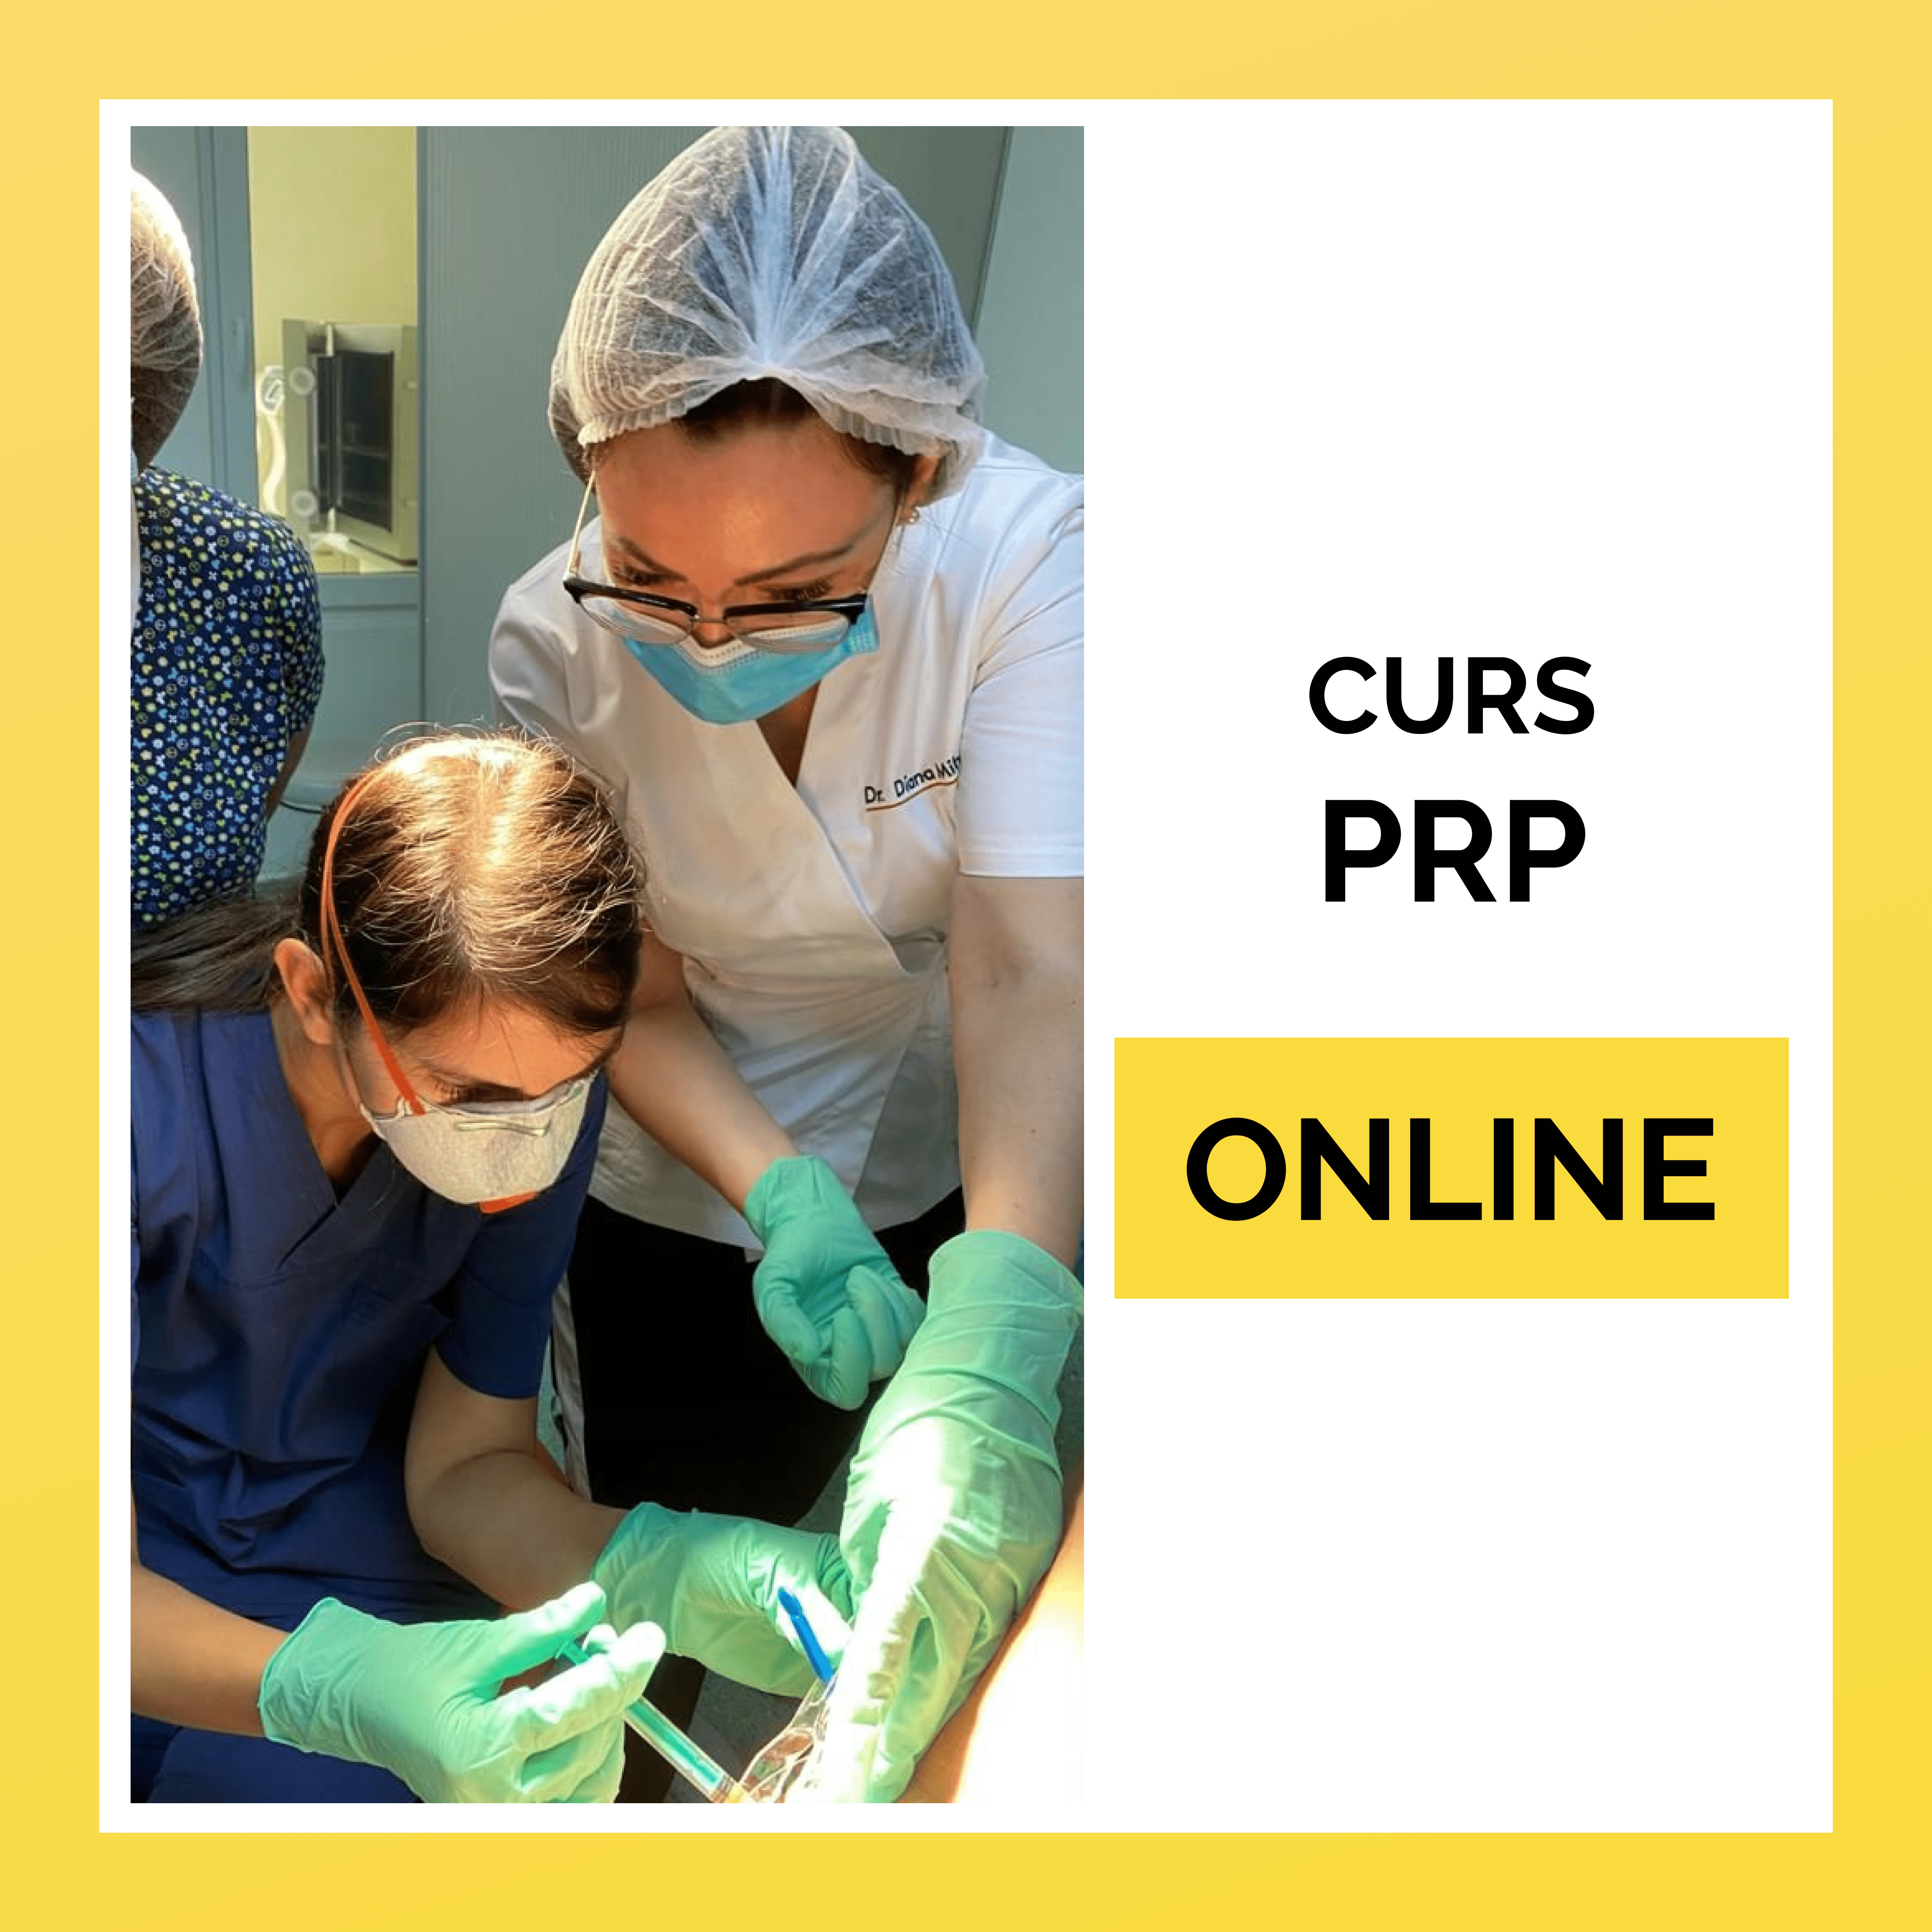 Curs Online Laser PRP in Ginecologie, Dr Diana Mihai-min